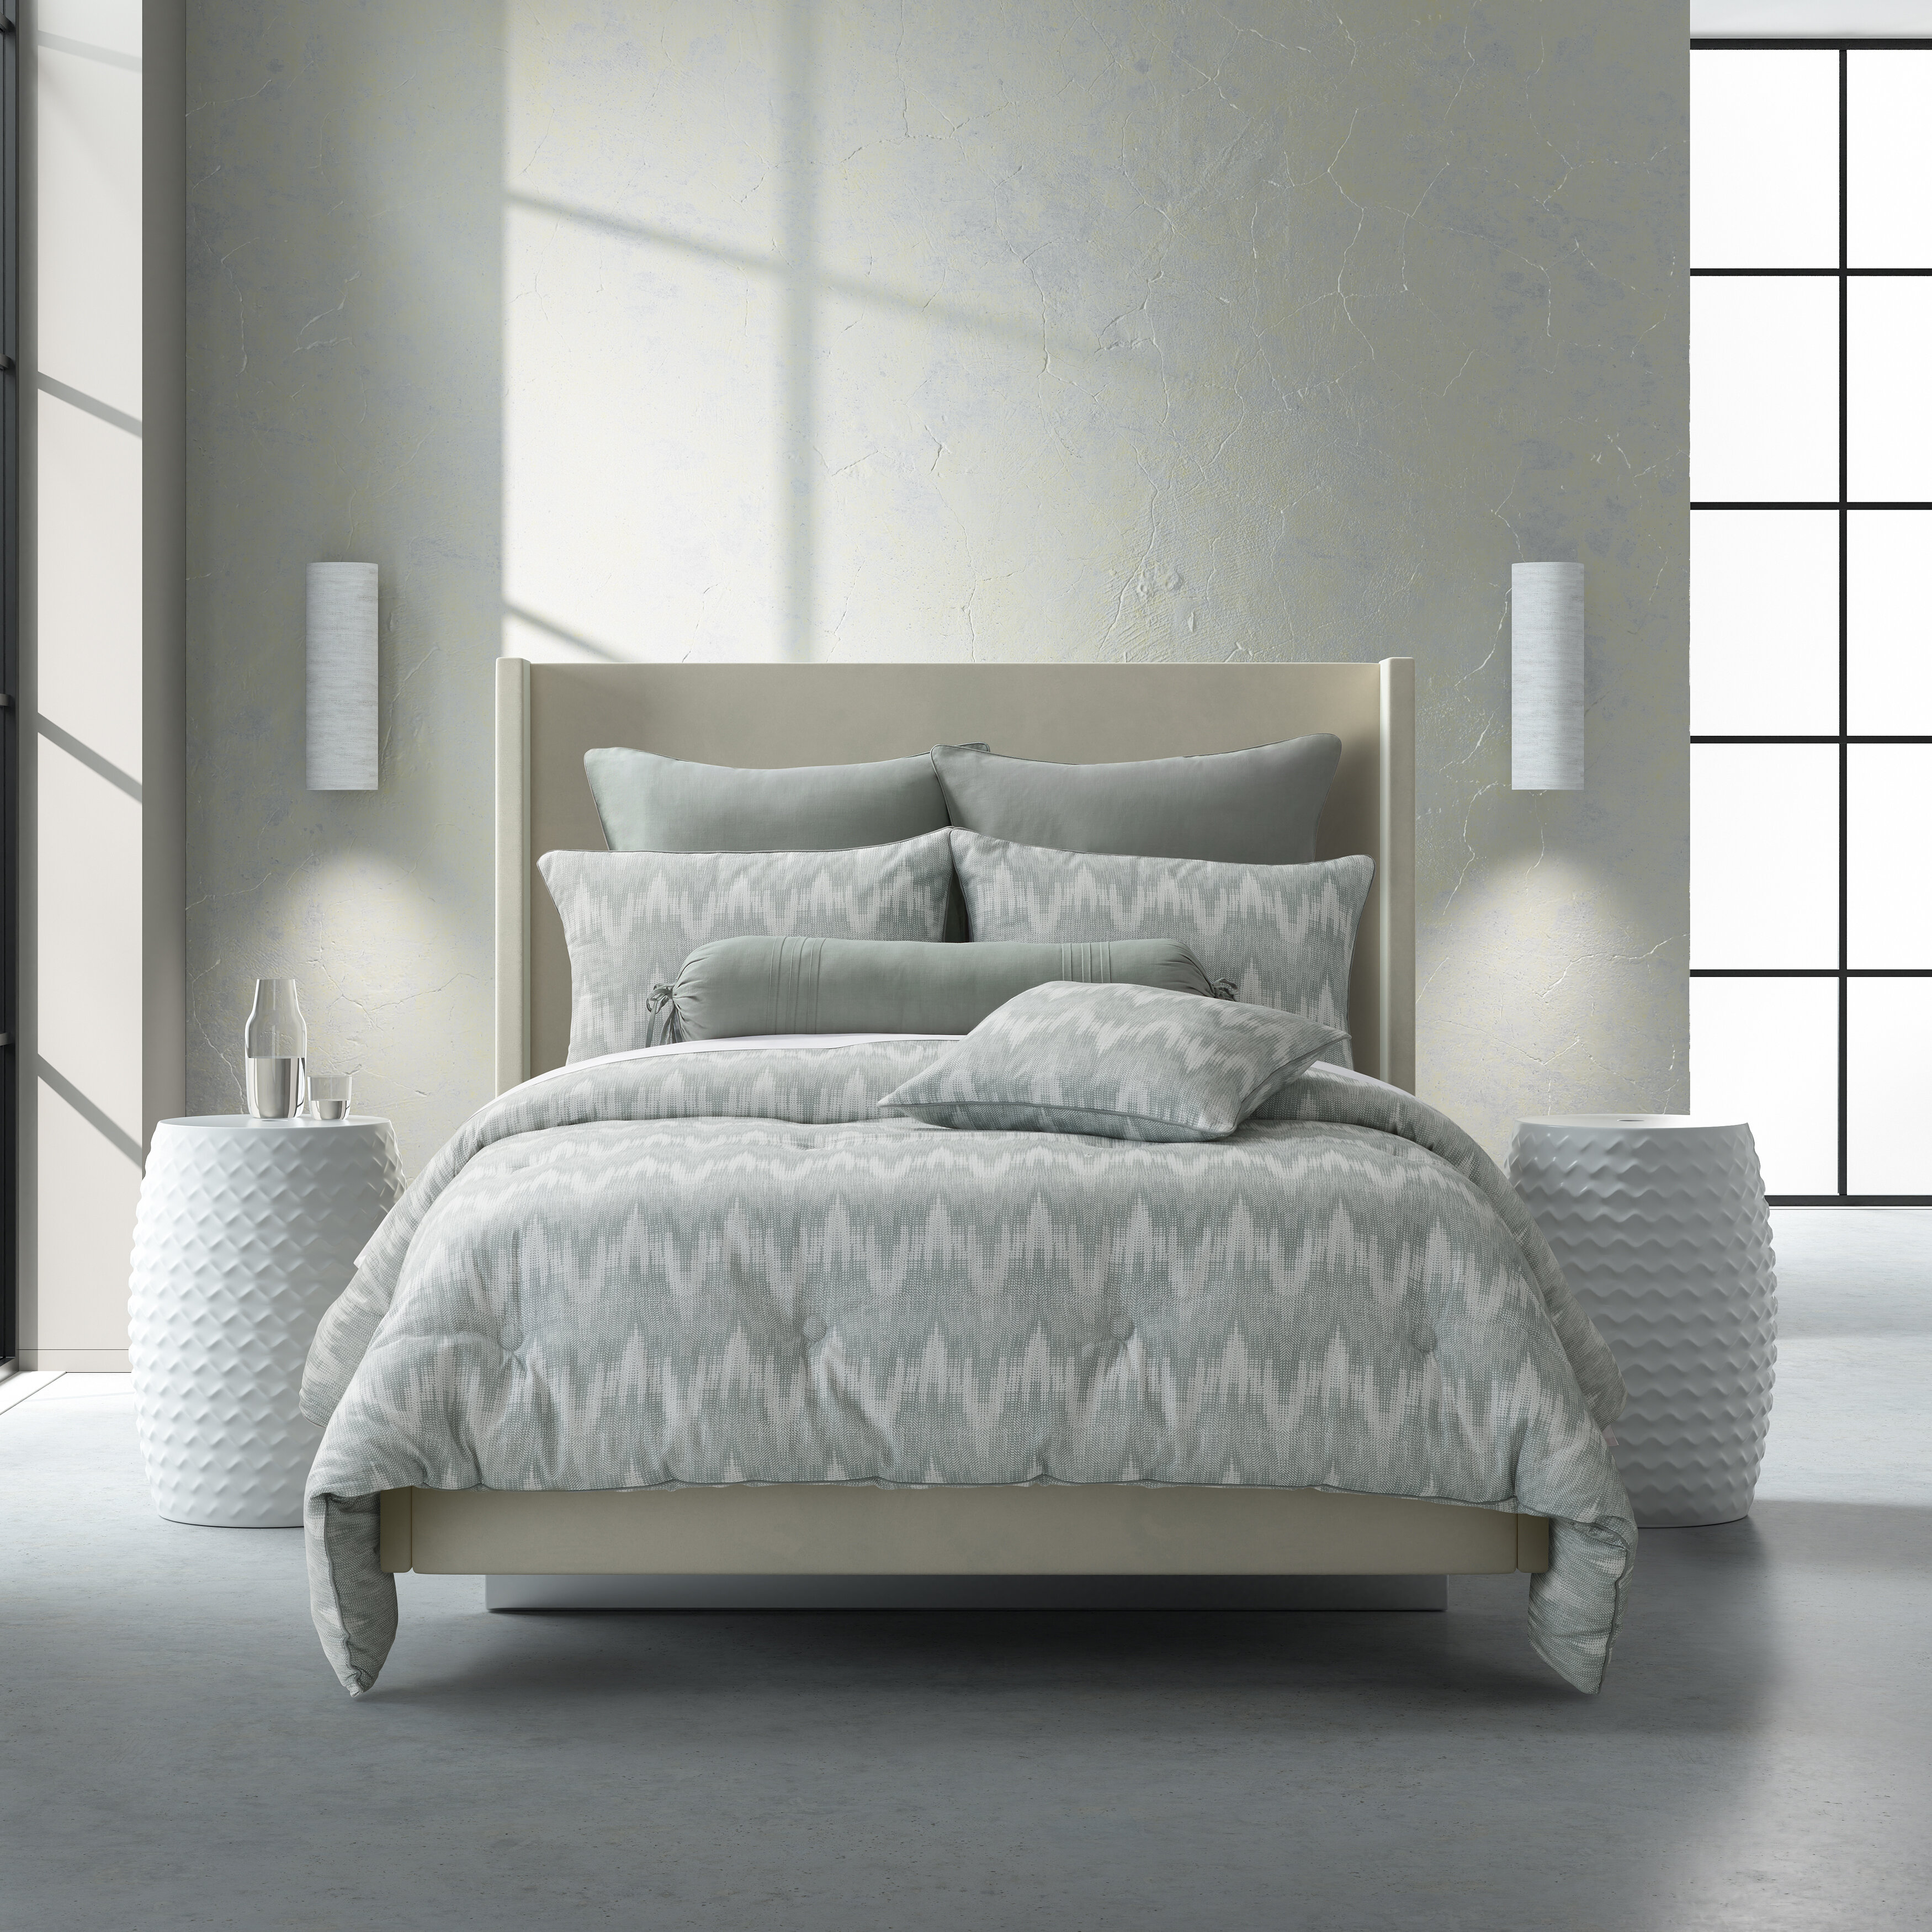 Details about   Gray & Green lines COMFORTER REVERSIBLE set KING SIZE Perfect gift & Decoration 